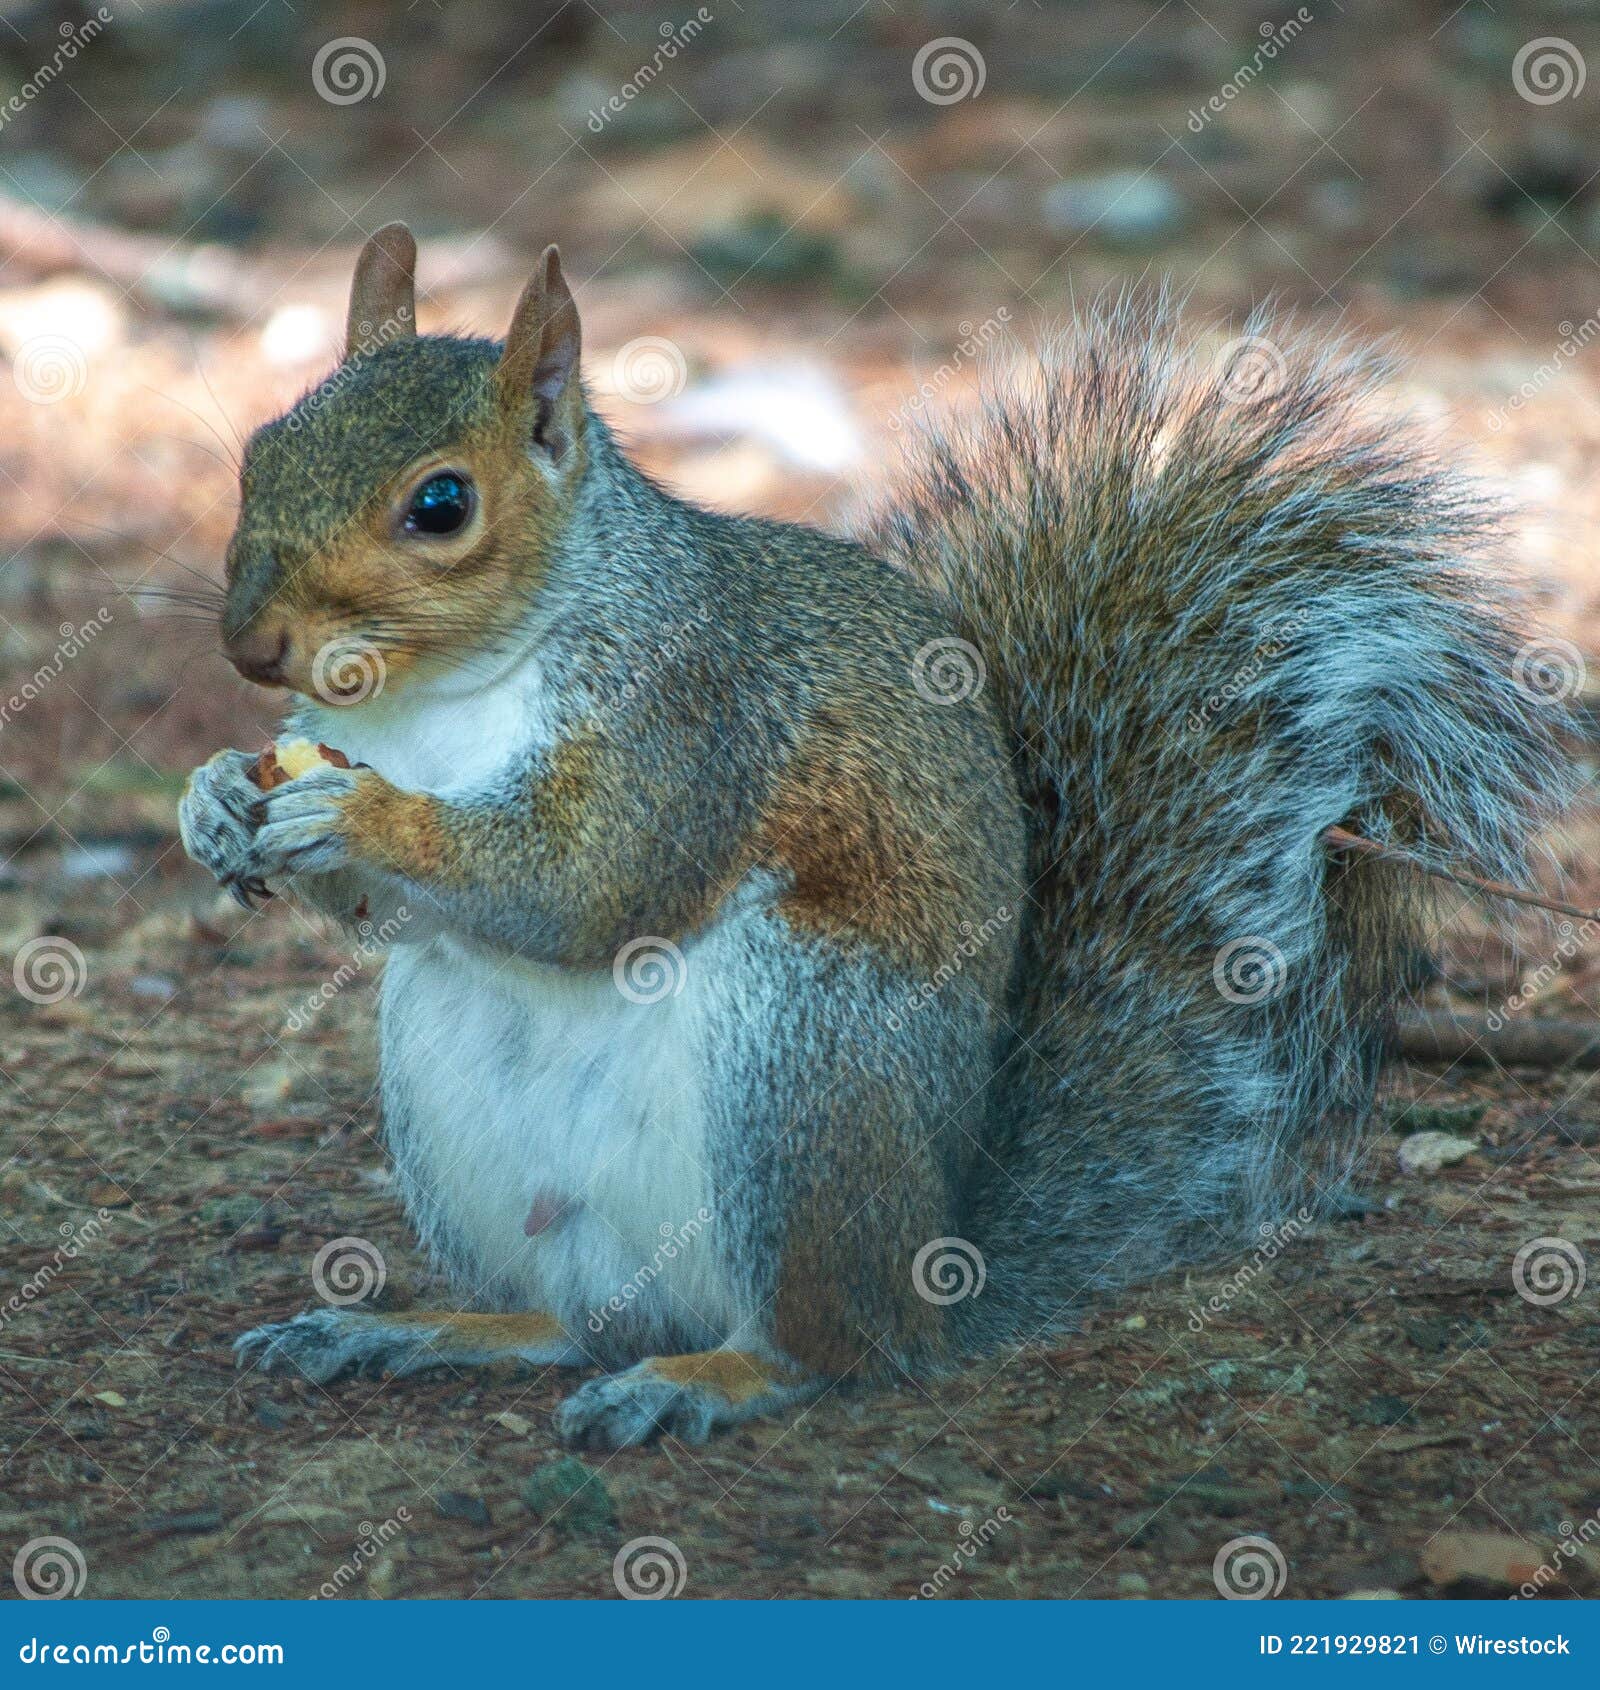 portrait of a grey squirrell eating